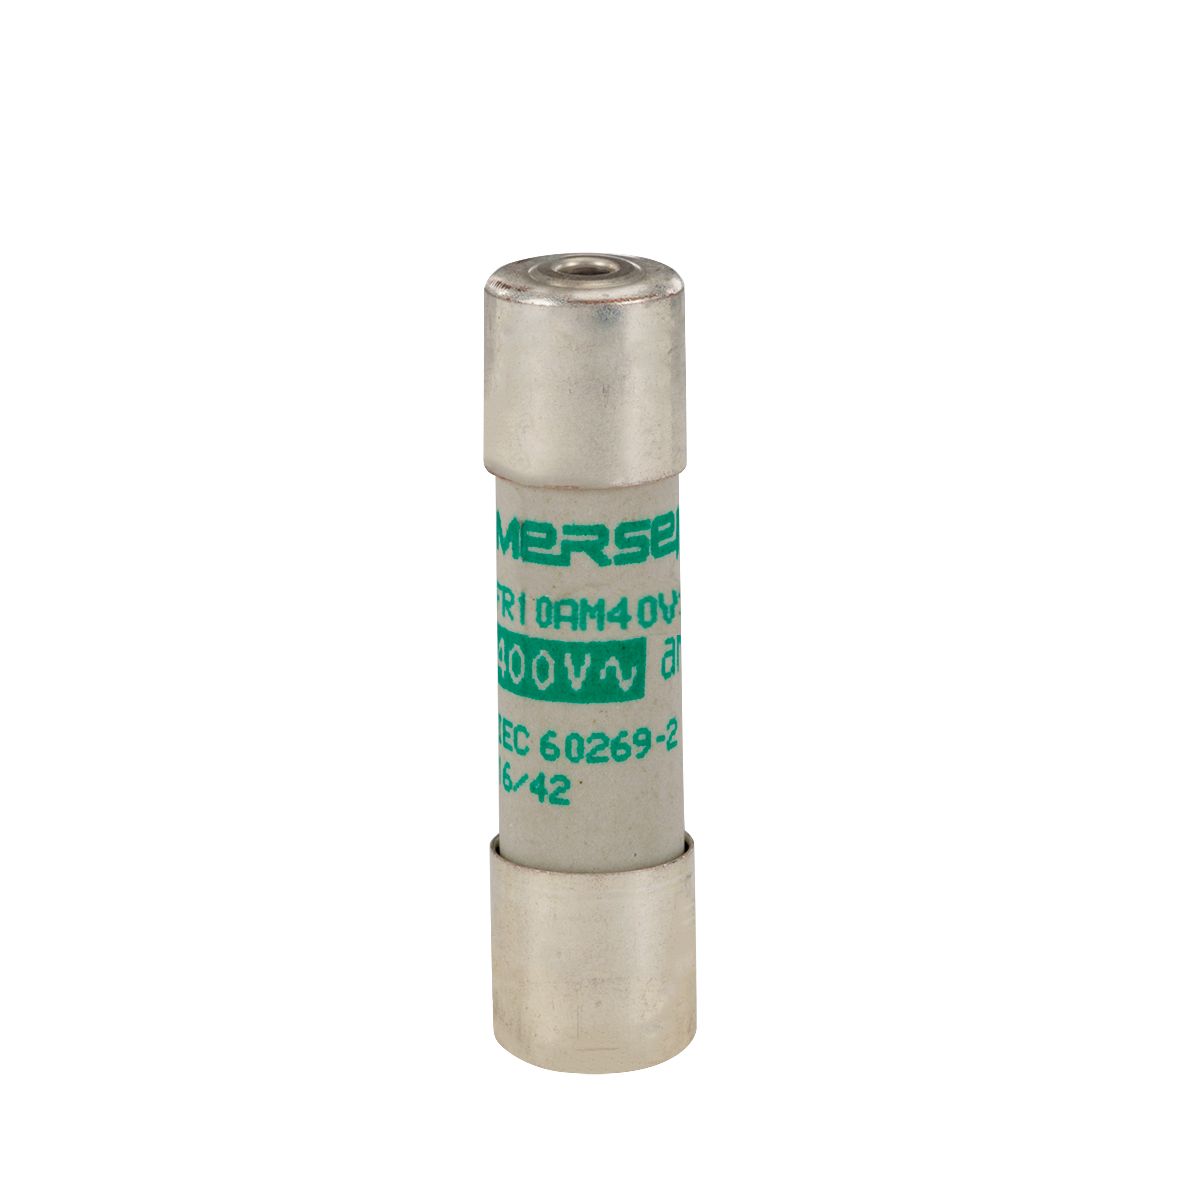 W085257 - Cylindrical fuse-link aM 400VAC 10.3x38, 6A with striker